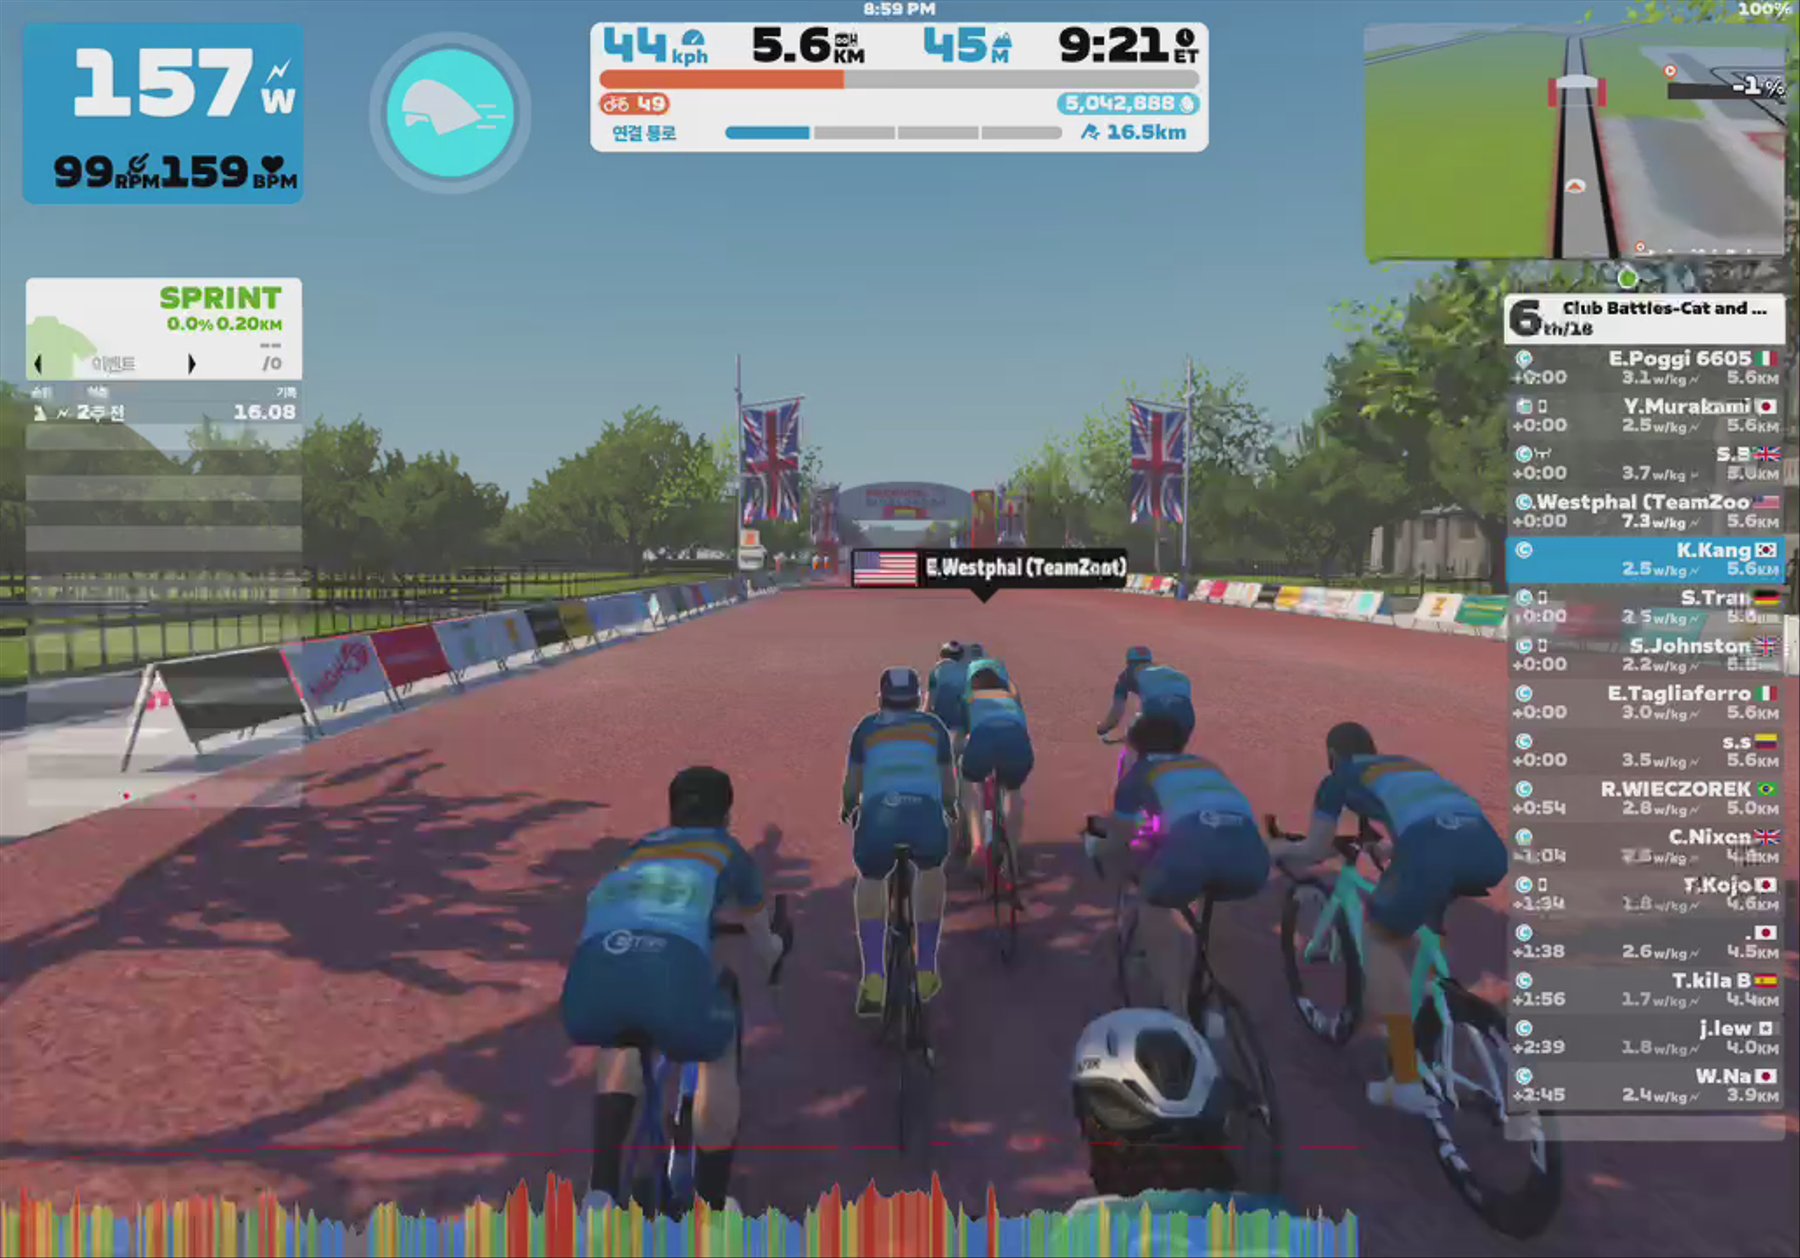 Zwift - Group Ride: Club Battles-Cat and Mouse Chase Race (C) on Classique in London